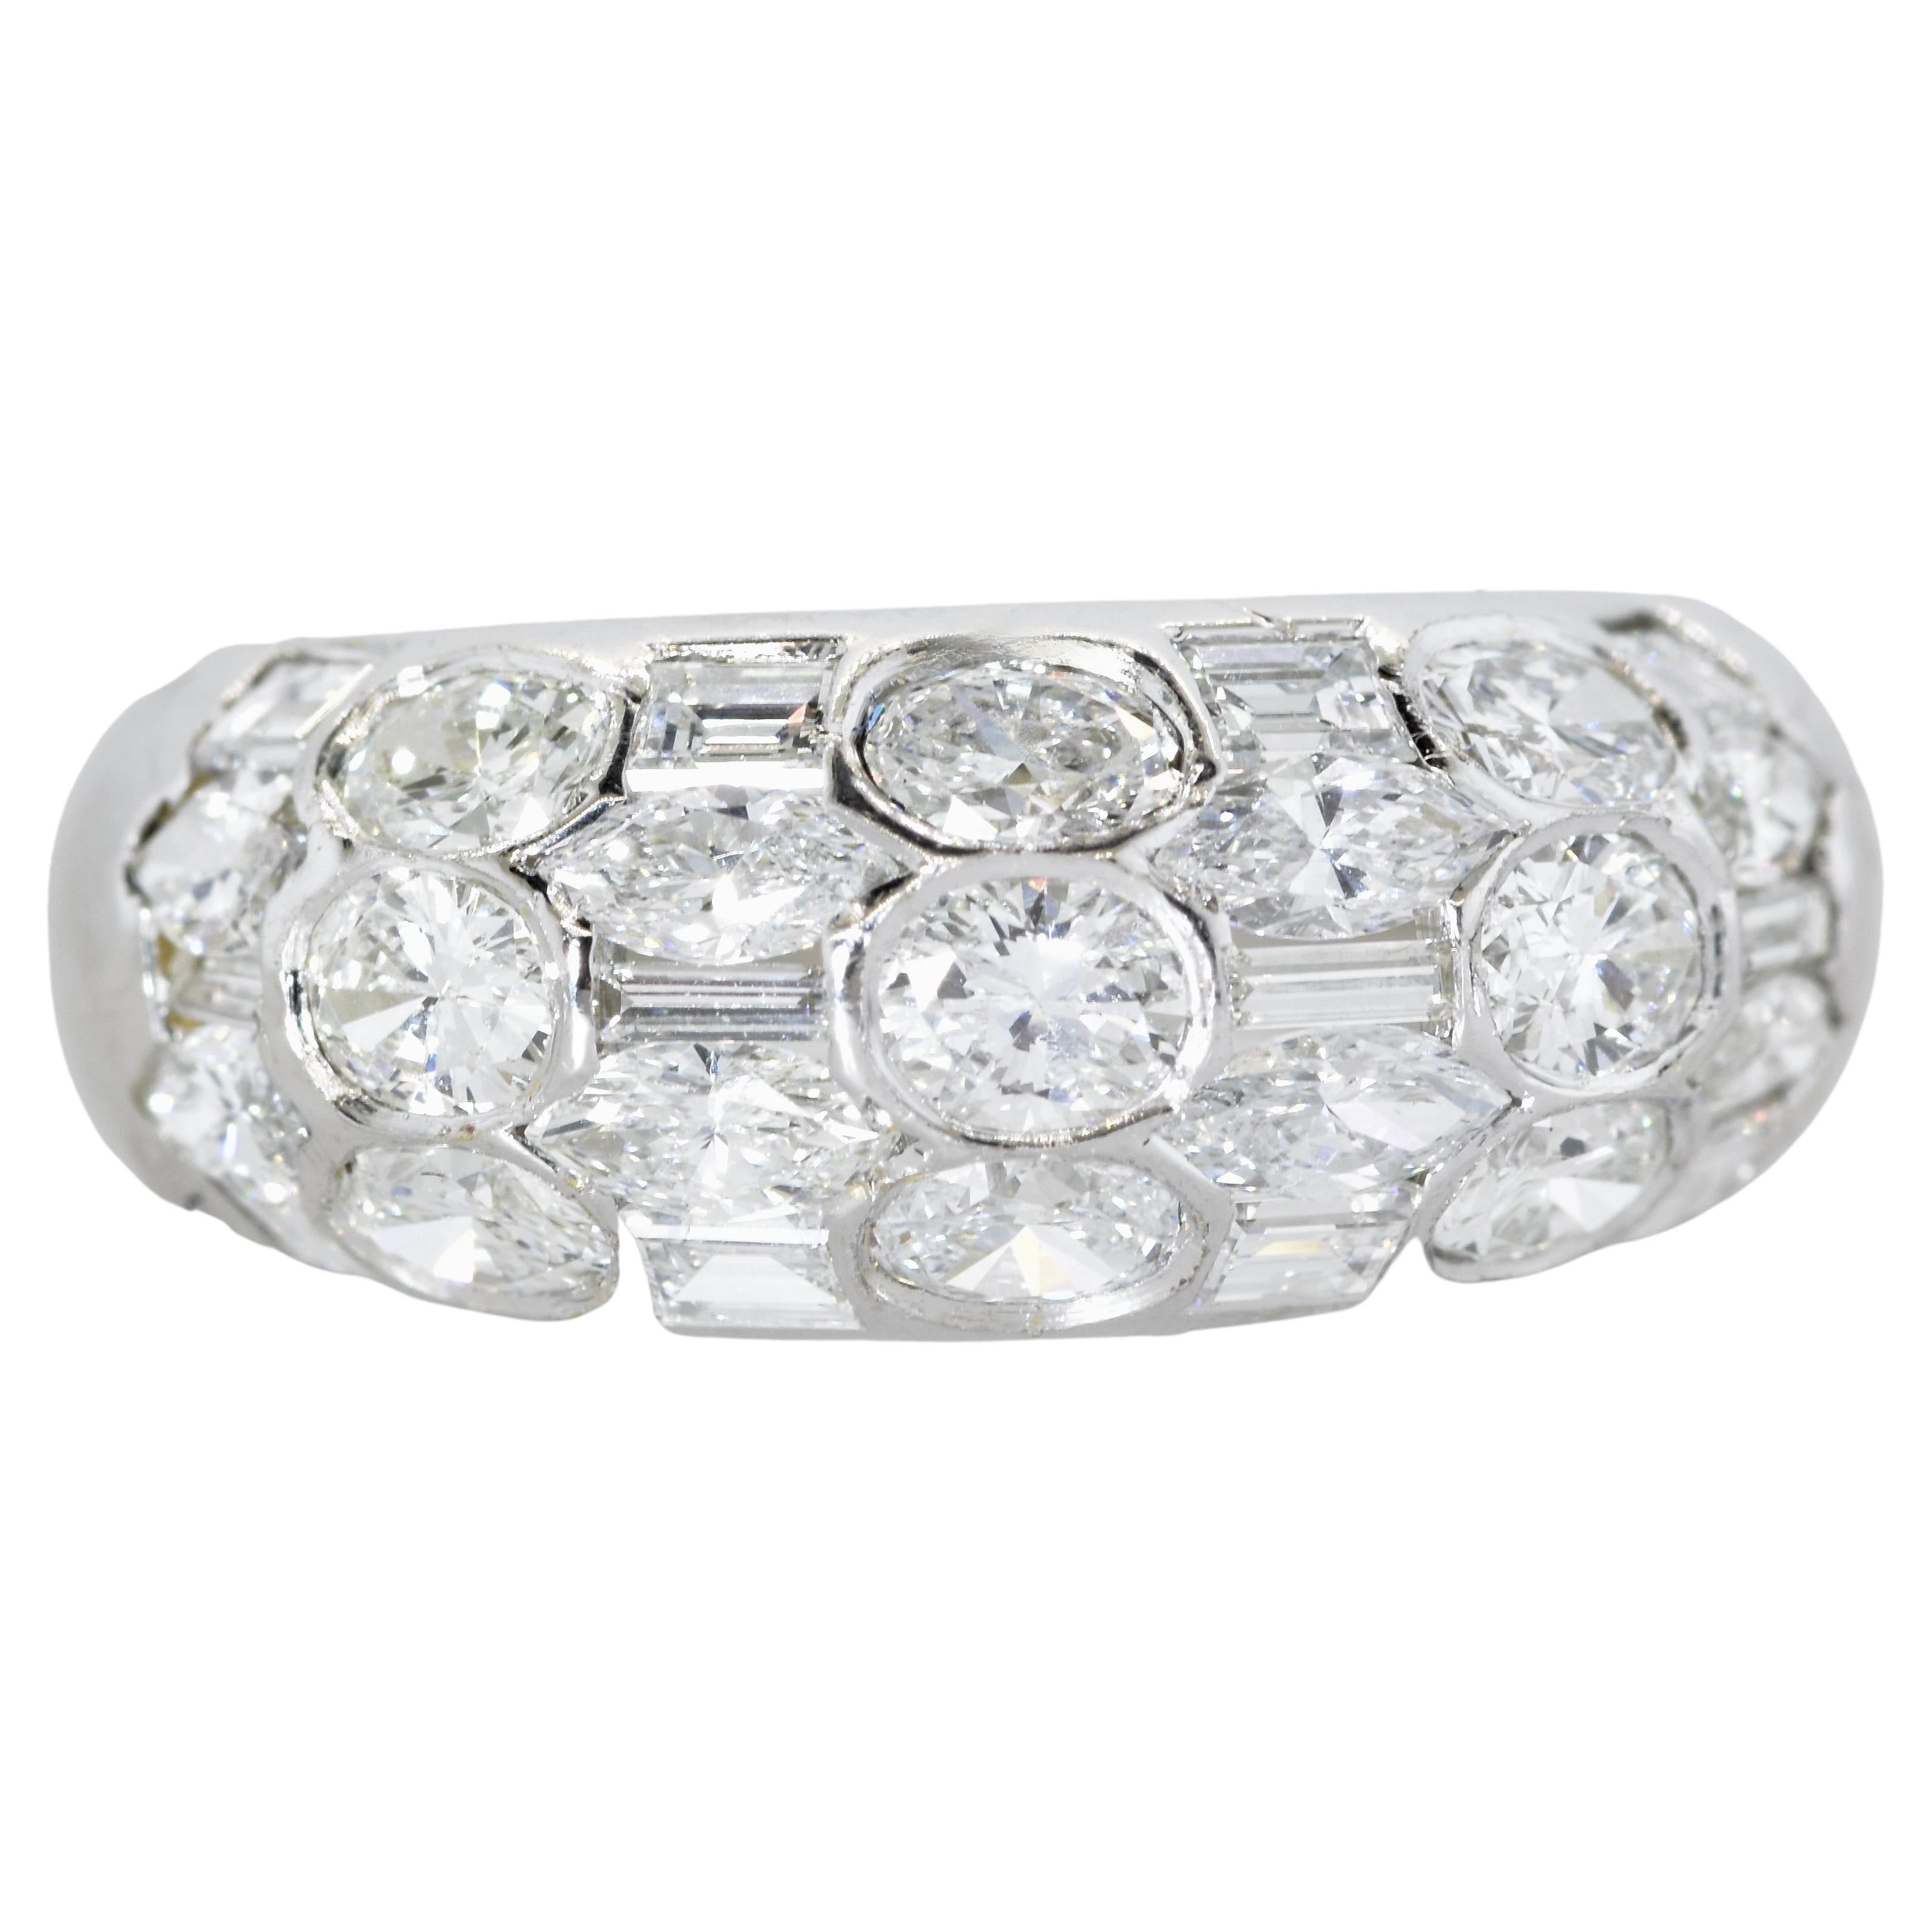 Oval Cut Fancy Cut Diamond with 2.50 cts. of fine white stones set in 18K White Gold Ring